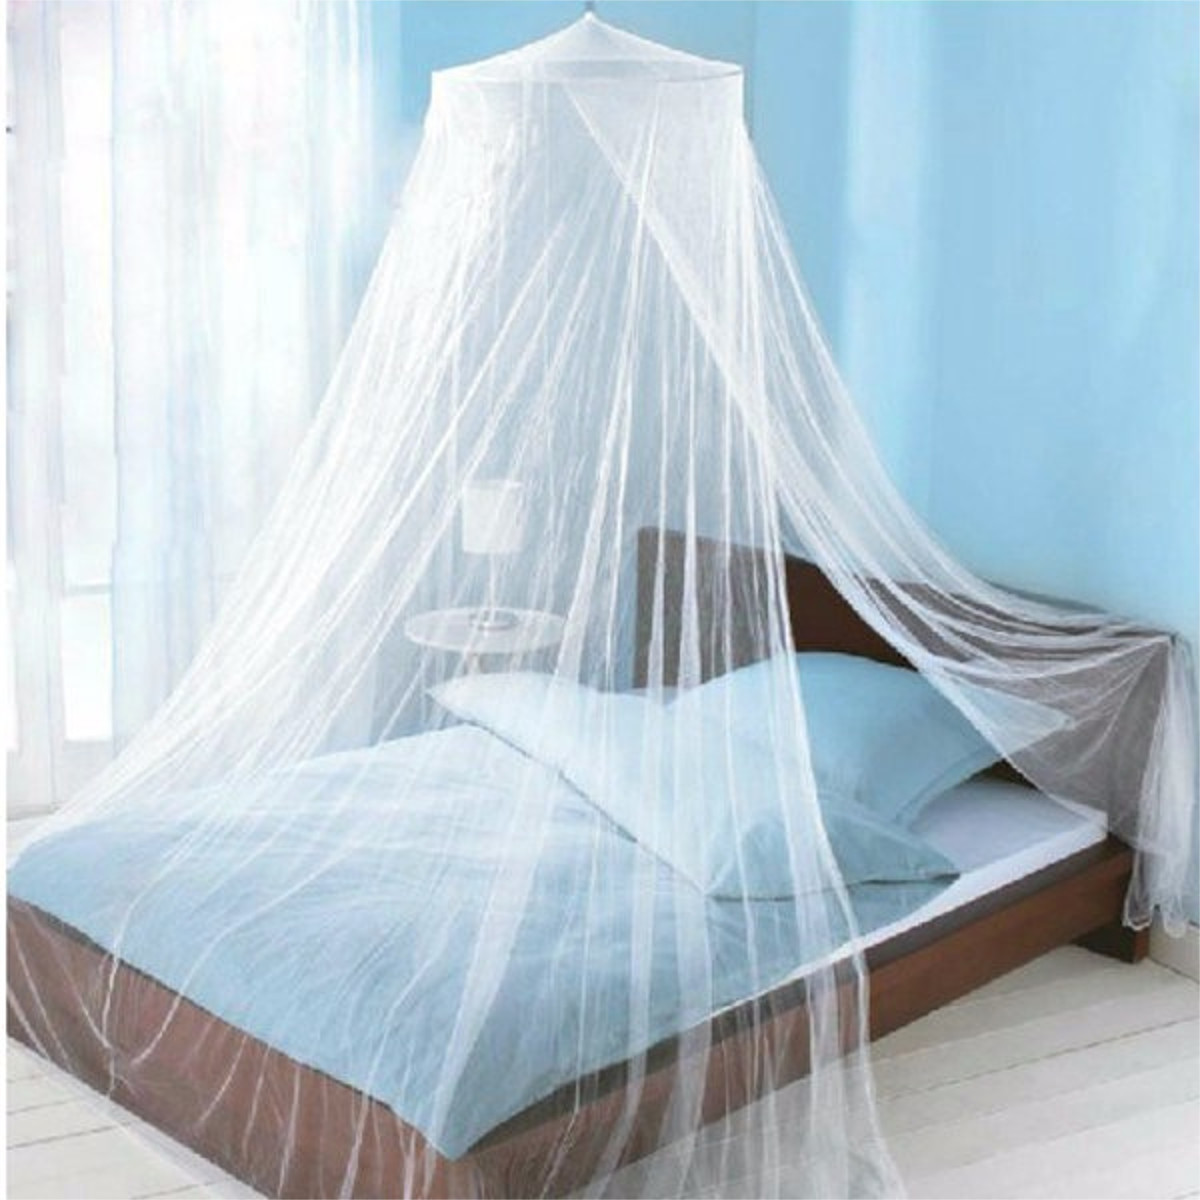 

5 Colors Lace Hanging Bedding Mosquito Net Dome Princess Bed Canopy Netting Bedroom Decor